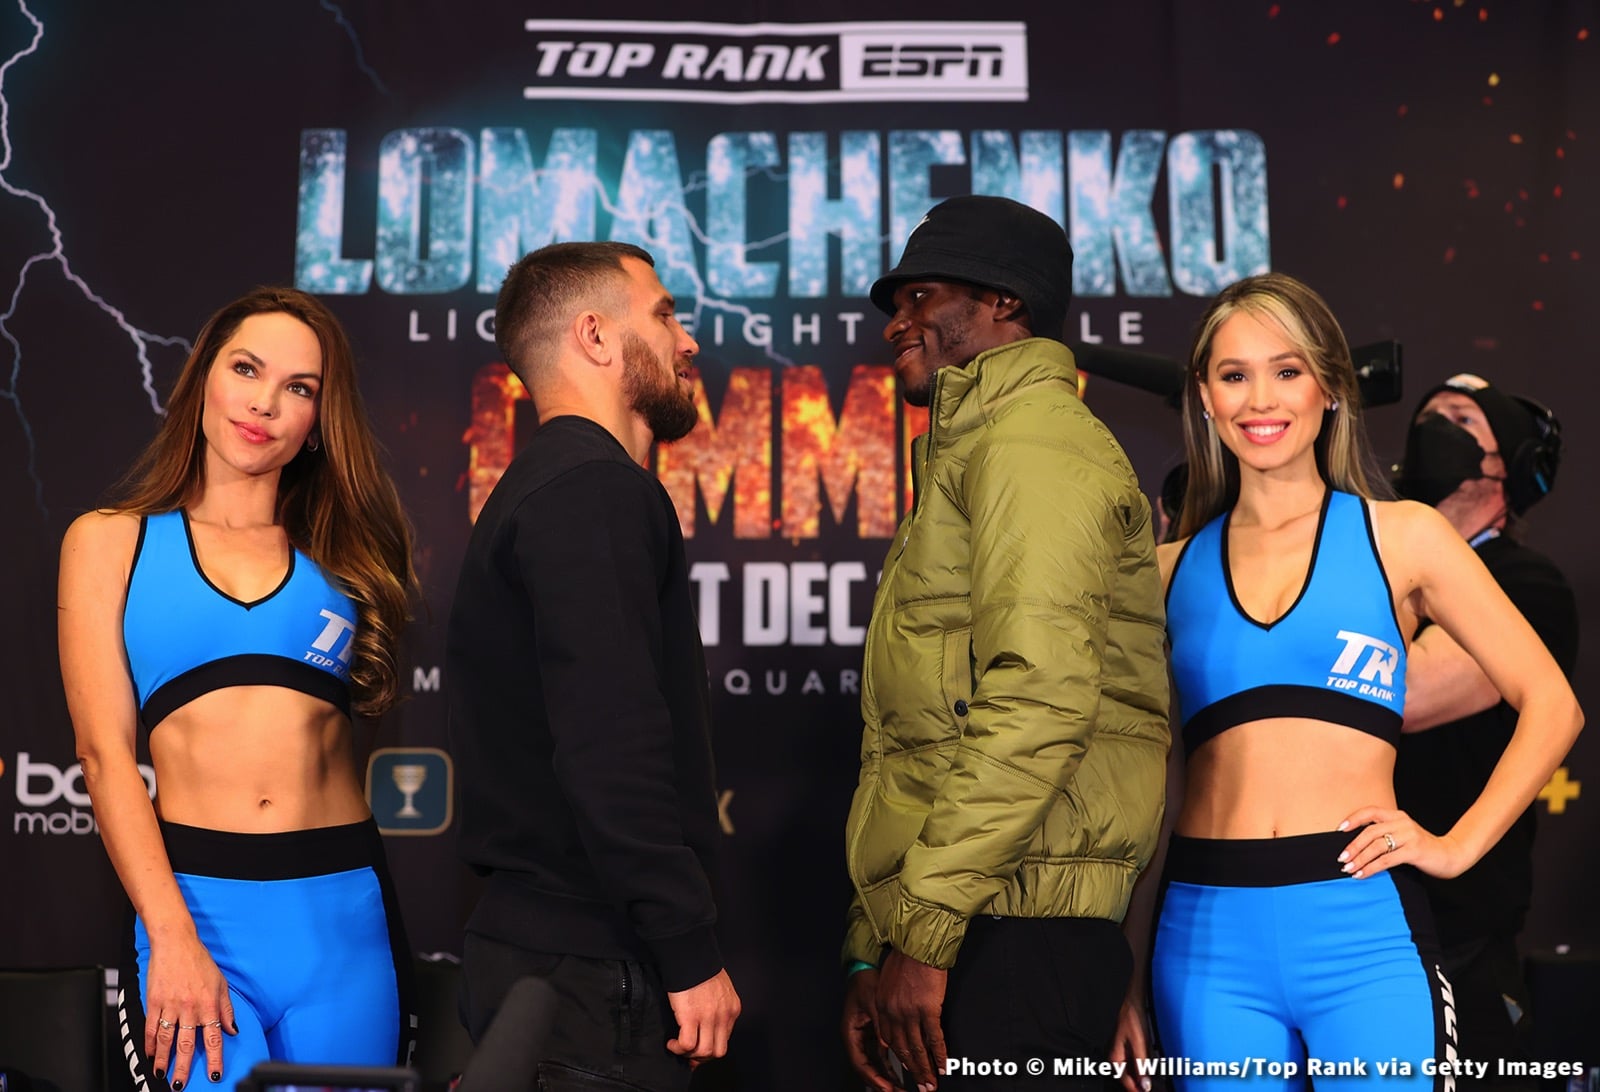 Lomachenko - Commey Official ESPN Weigh In Results